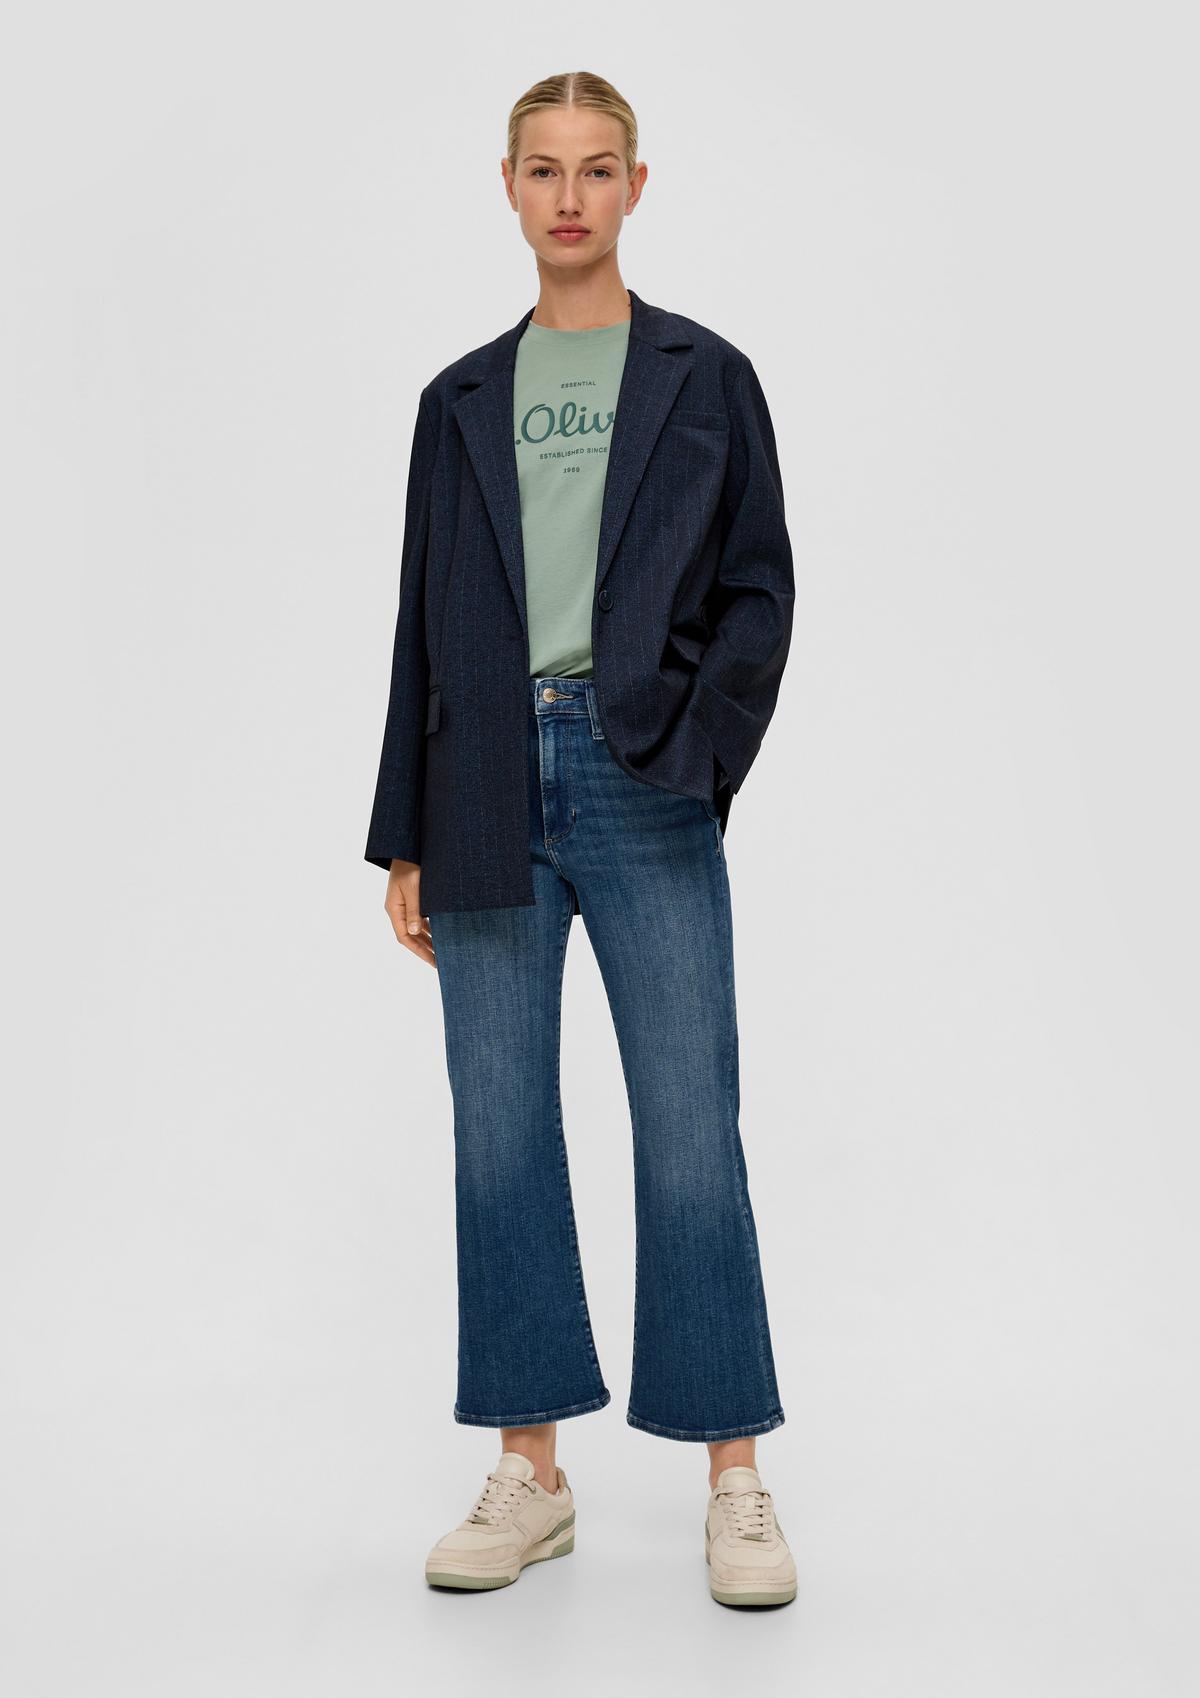 s.Oliver Cropped Jeans / High Rise / Flared Leg / Stretch Cotton